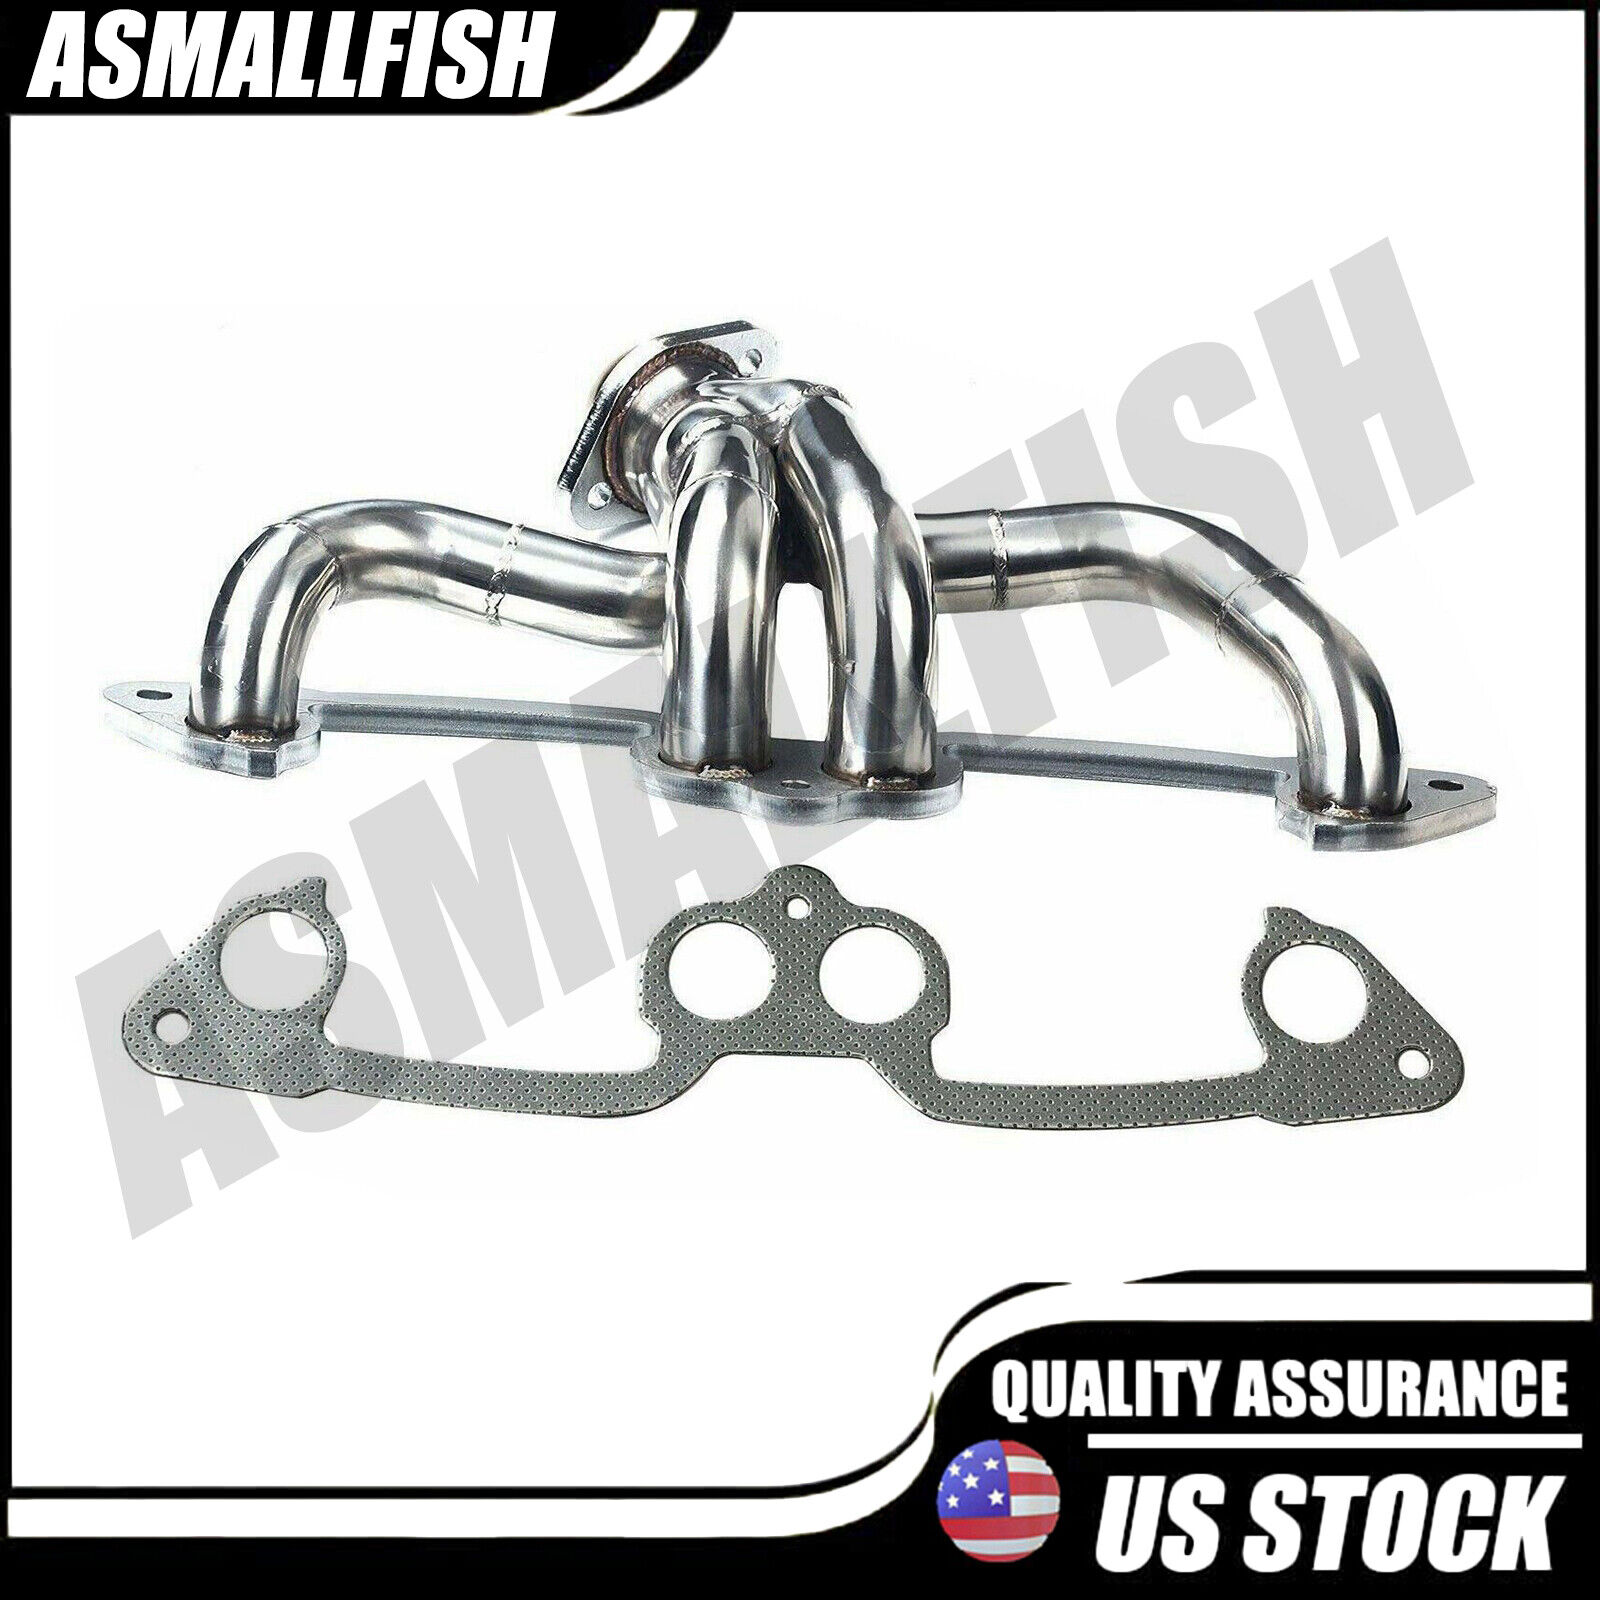 Stainless Manifold Header w/ Gasket NEW FITS FOR 1991-2002 Jeep Wrangler 2.5L L4